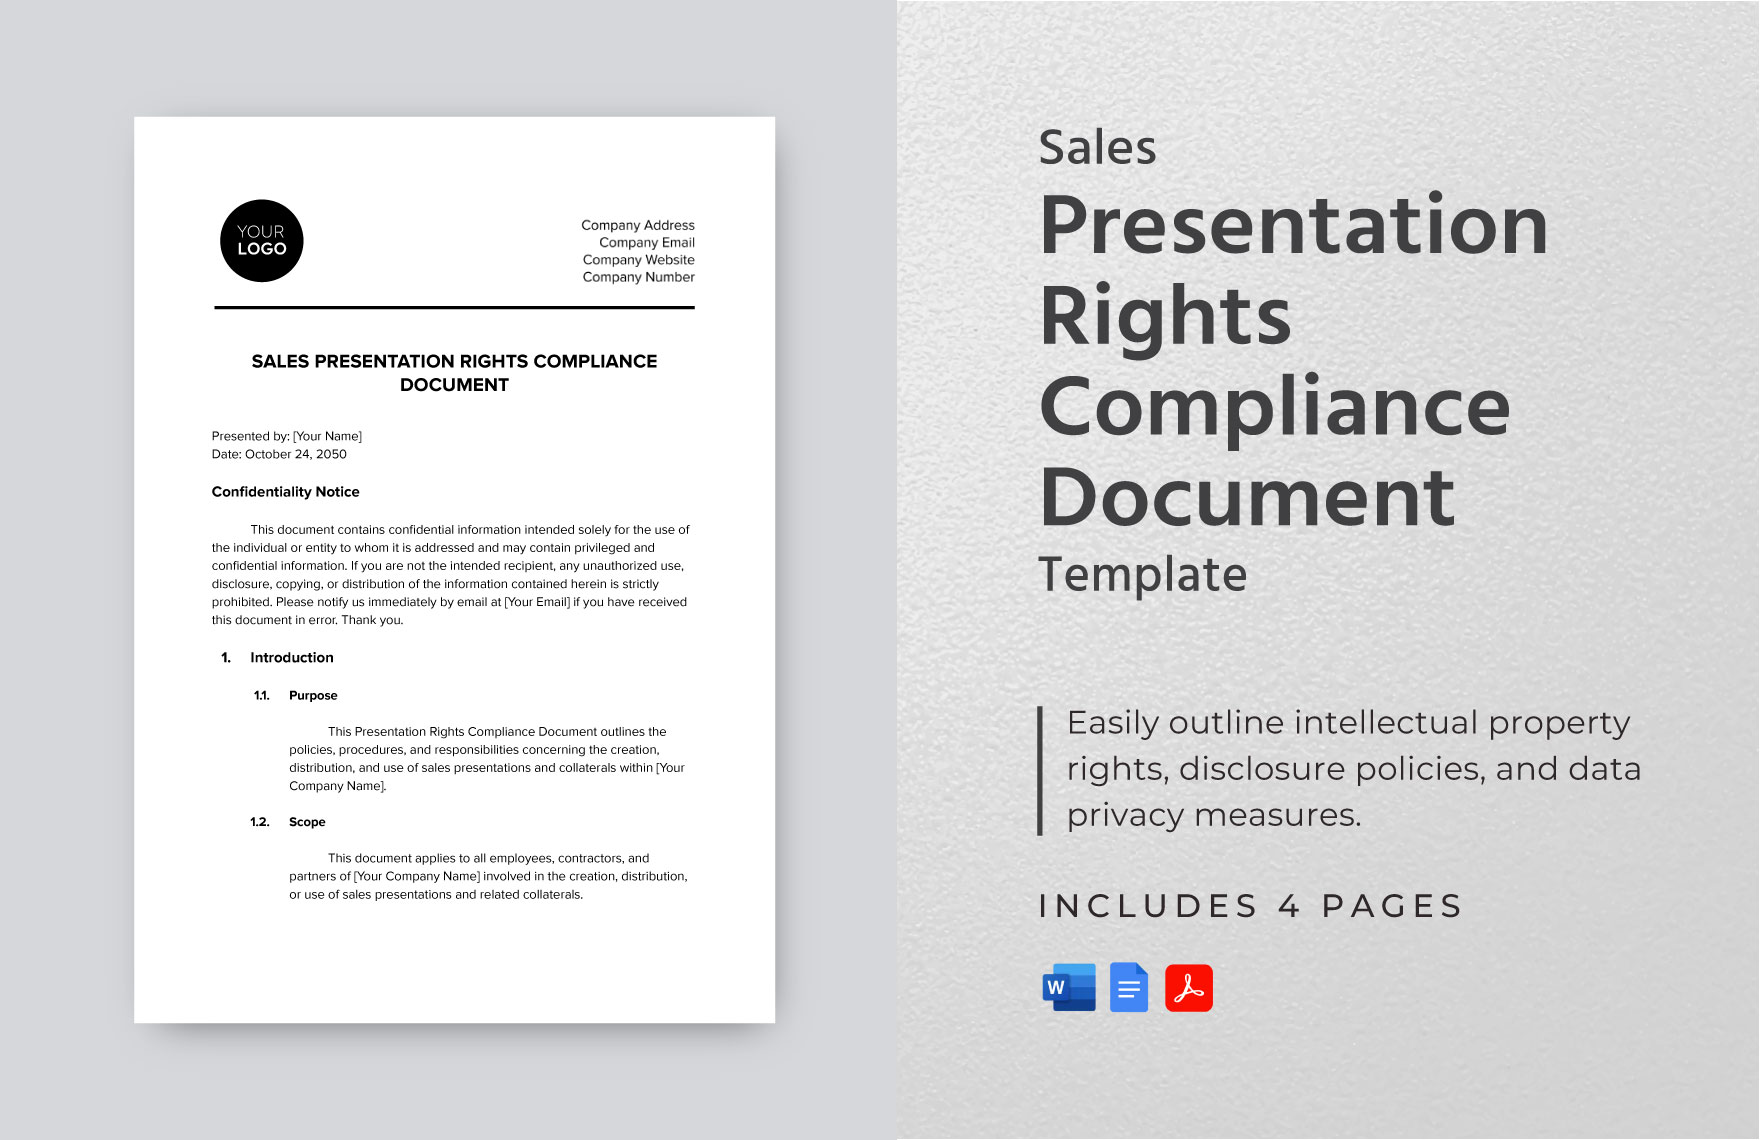 Sales Presentation Rights Compliance Document Template in Word, Google Docs, PDF